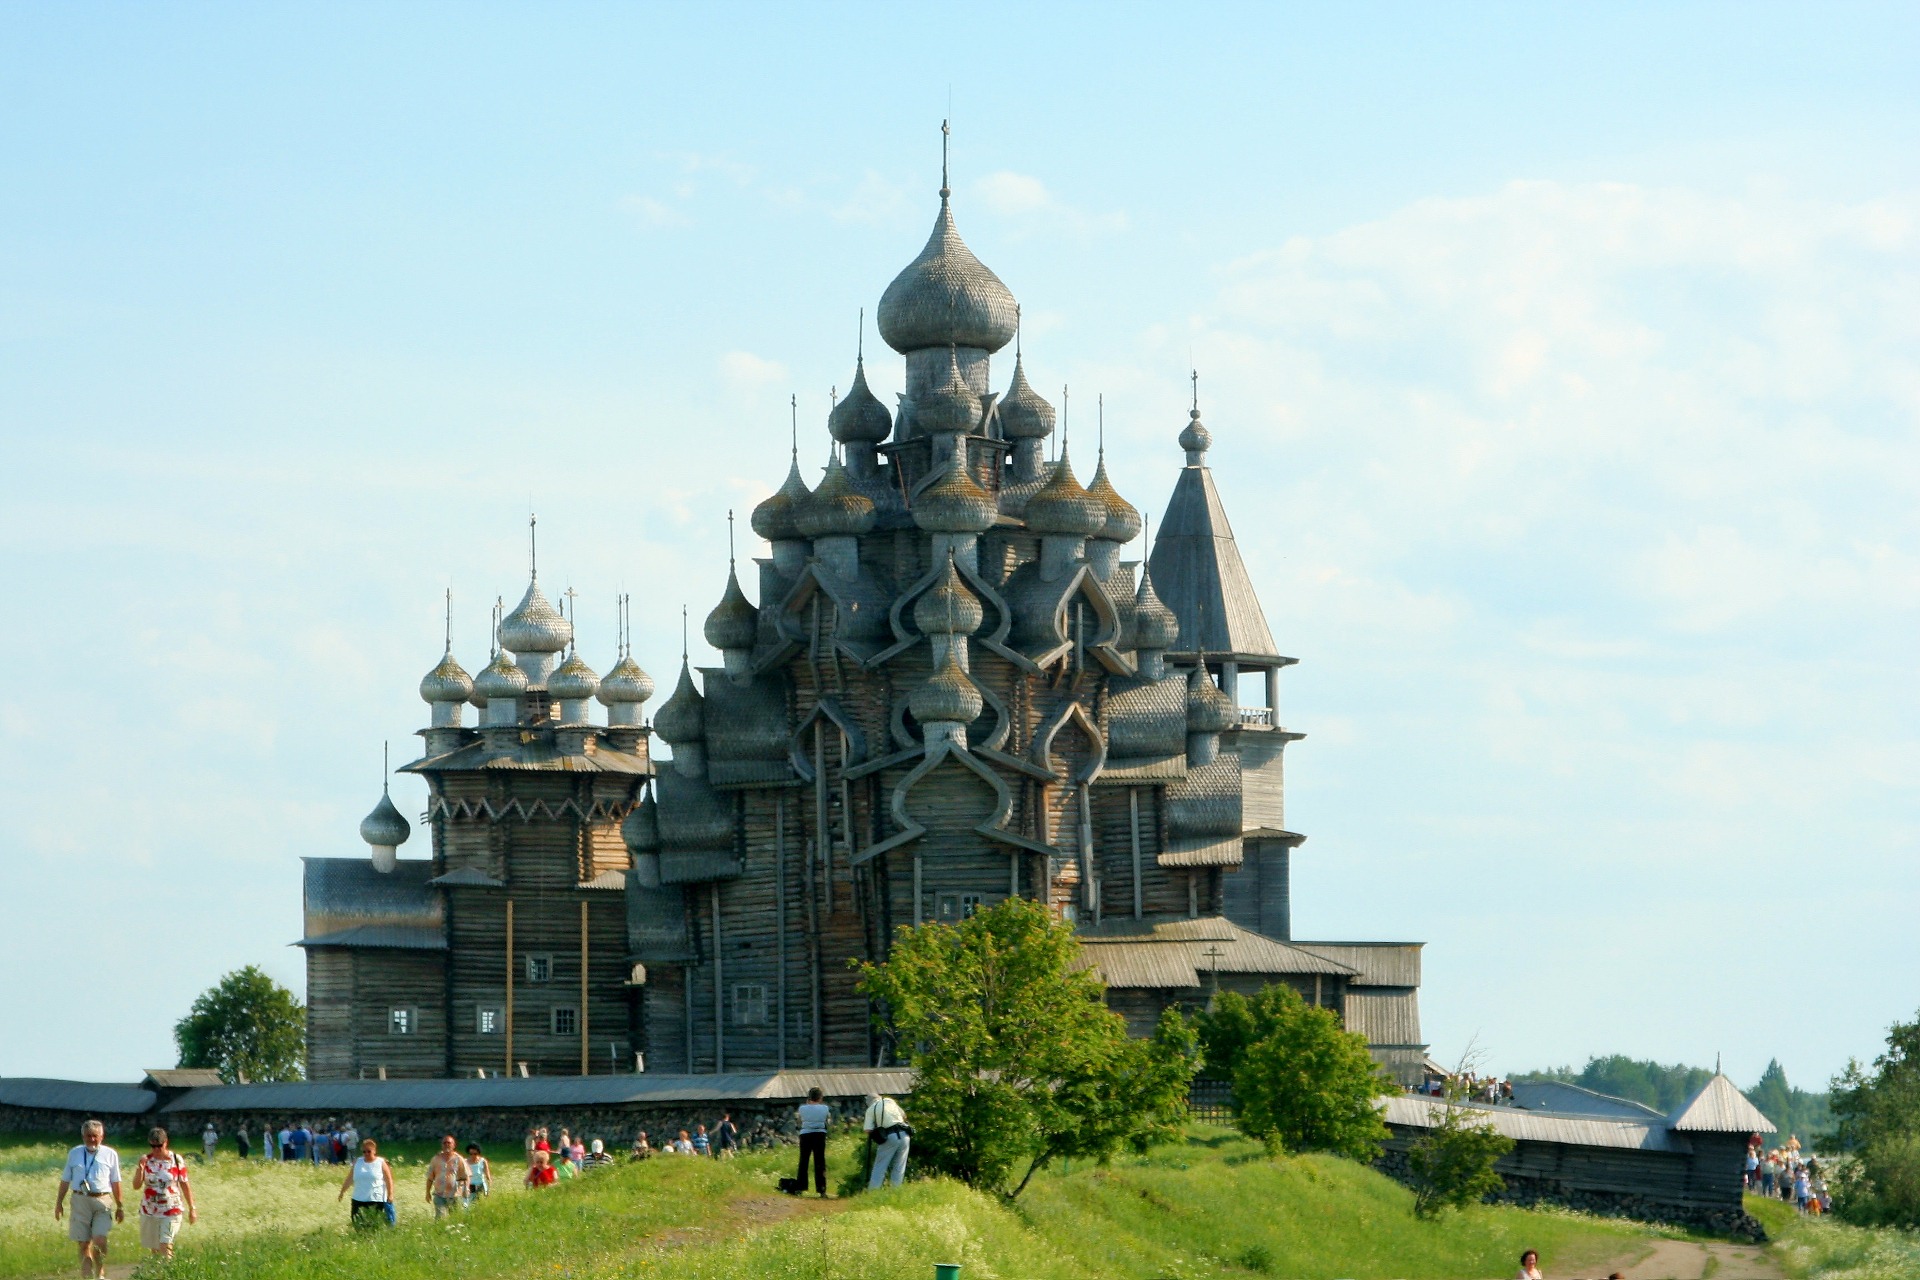 Kizhi Pogost World Heritage site Kizhi Pogost in Russian Karelia dates back to the 1700s and was inscribed on the World Heritage List in 1990. Photo: Matthias Kabel (CC BY-SA) via Wikimedia Commons